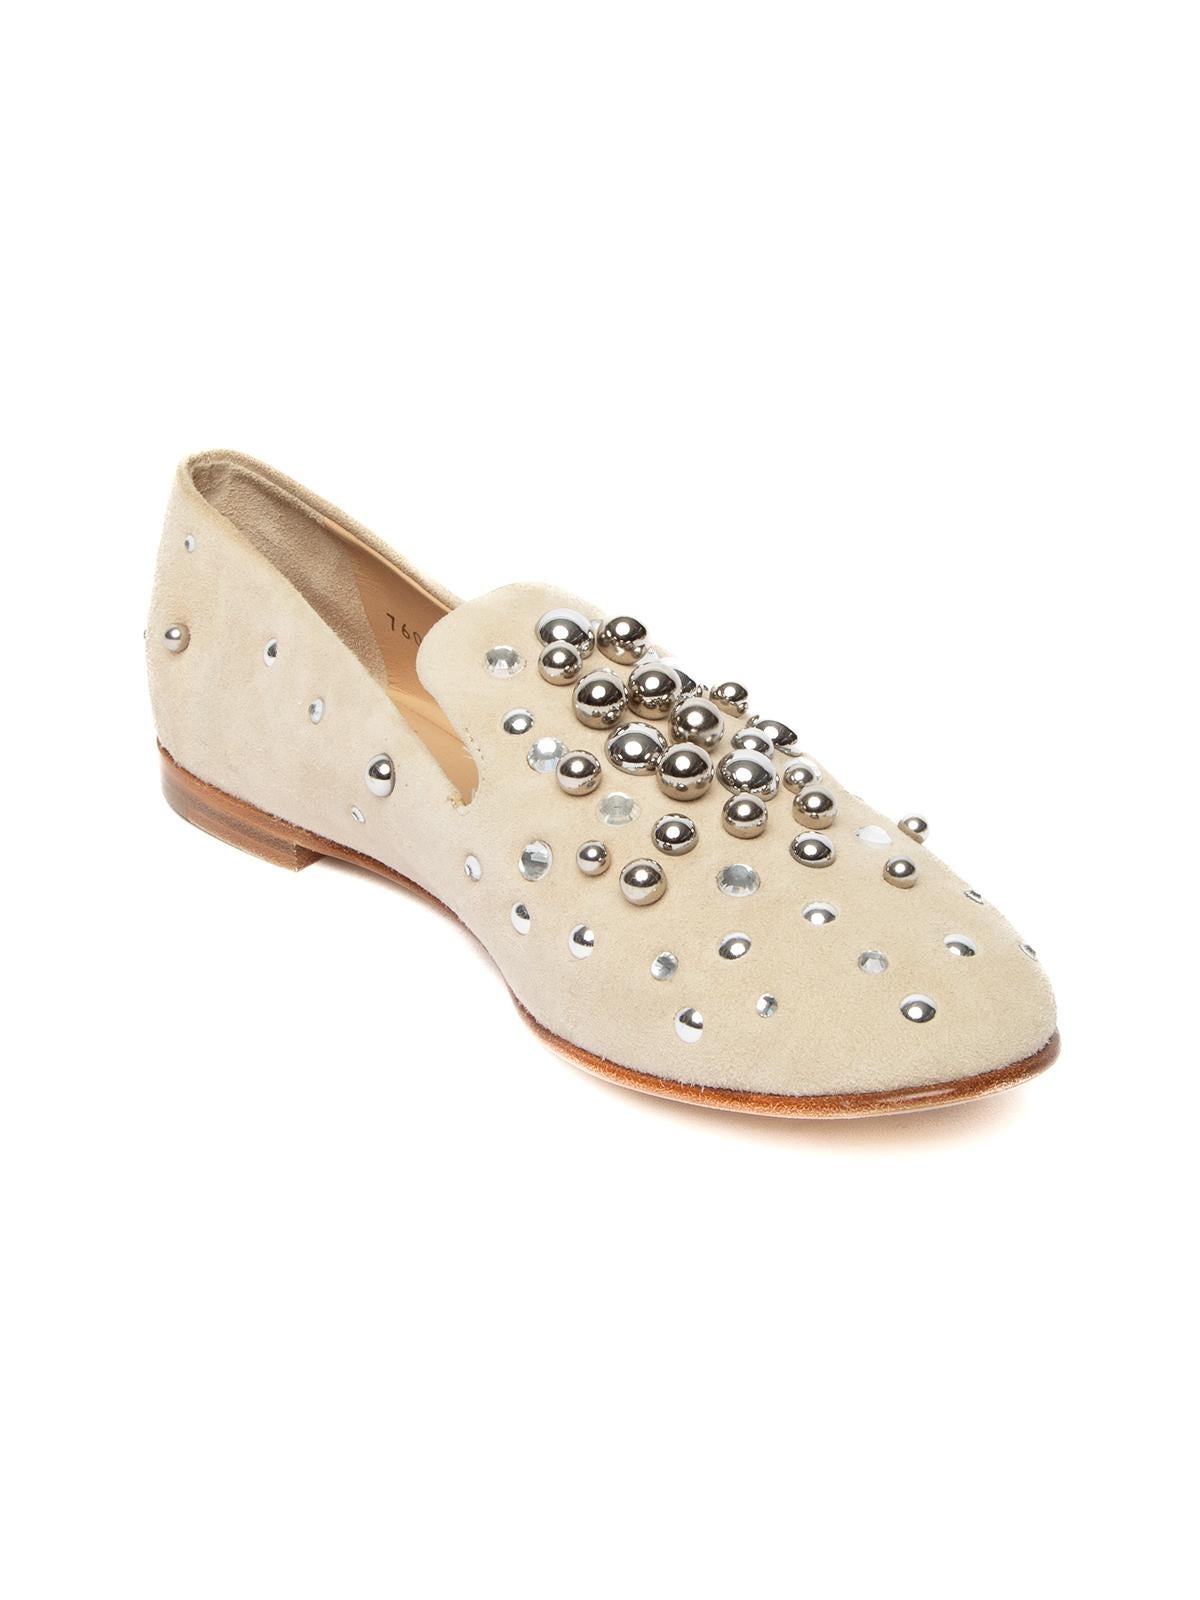 Condition is never worn, with tag. Original box and dust bag included. Details beige suede branded insole flat sole Size Fits true to size Fabric Suede Giuseppe Zanotti Women's Studded Slippers